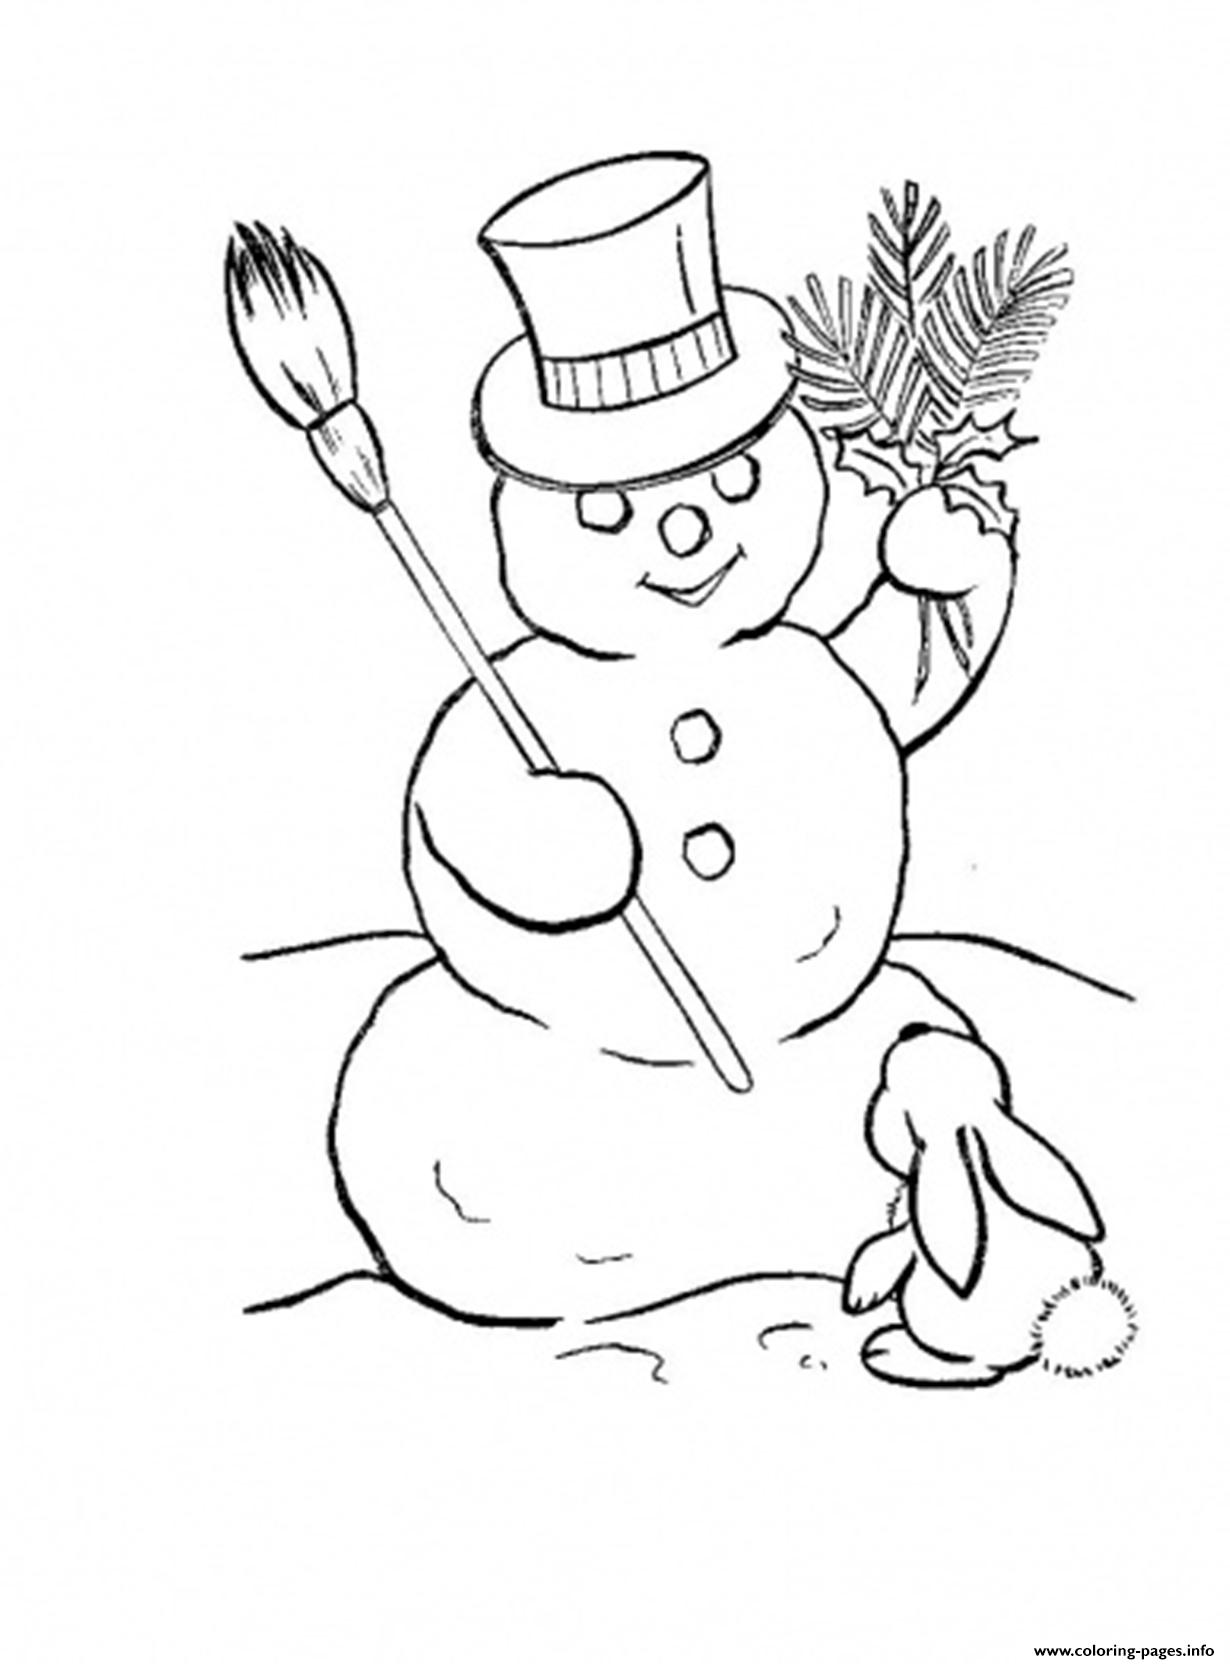 Rabbit And Snowman S To Print D615 coloring